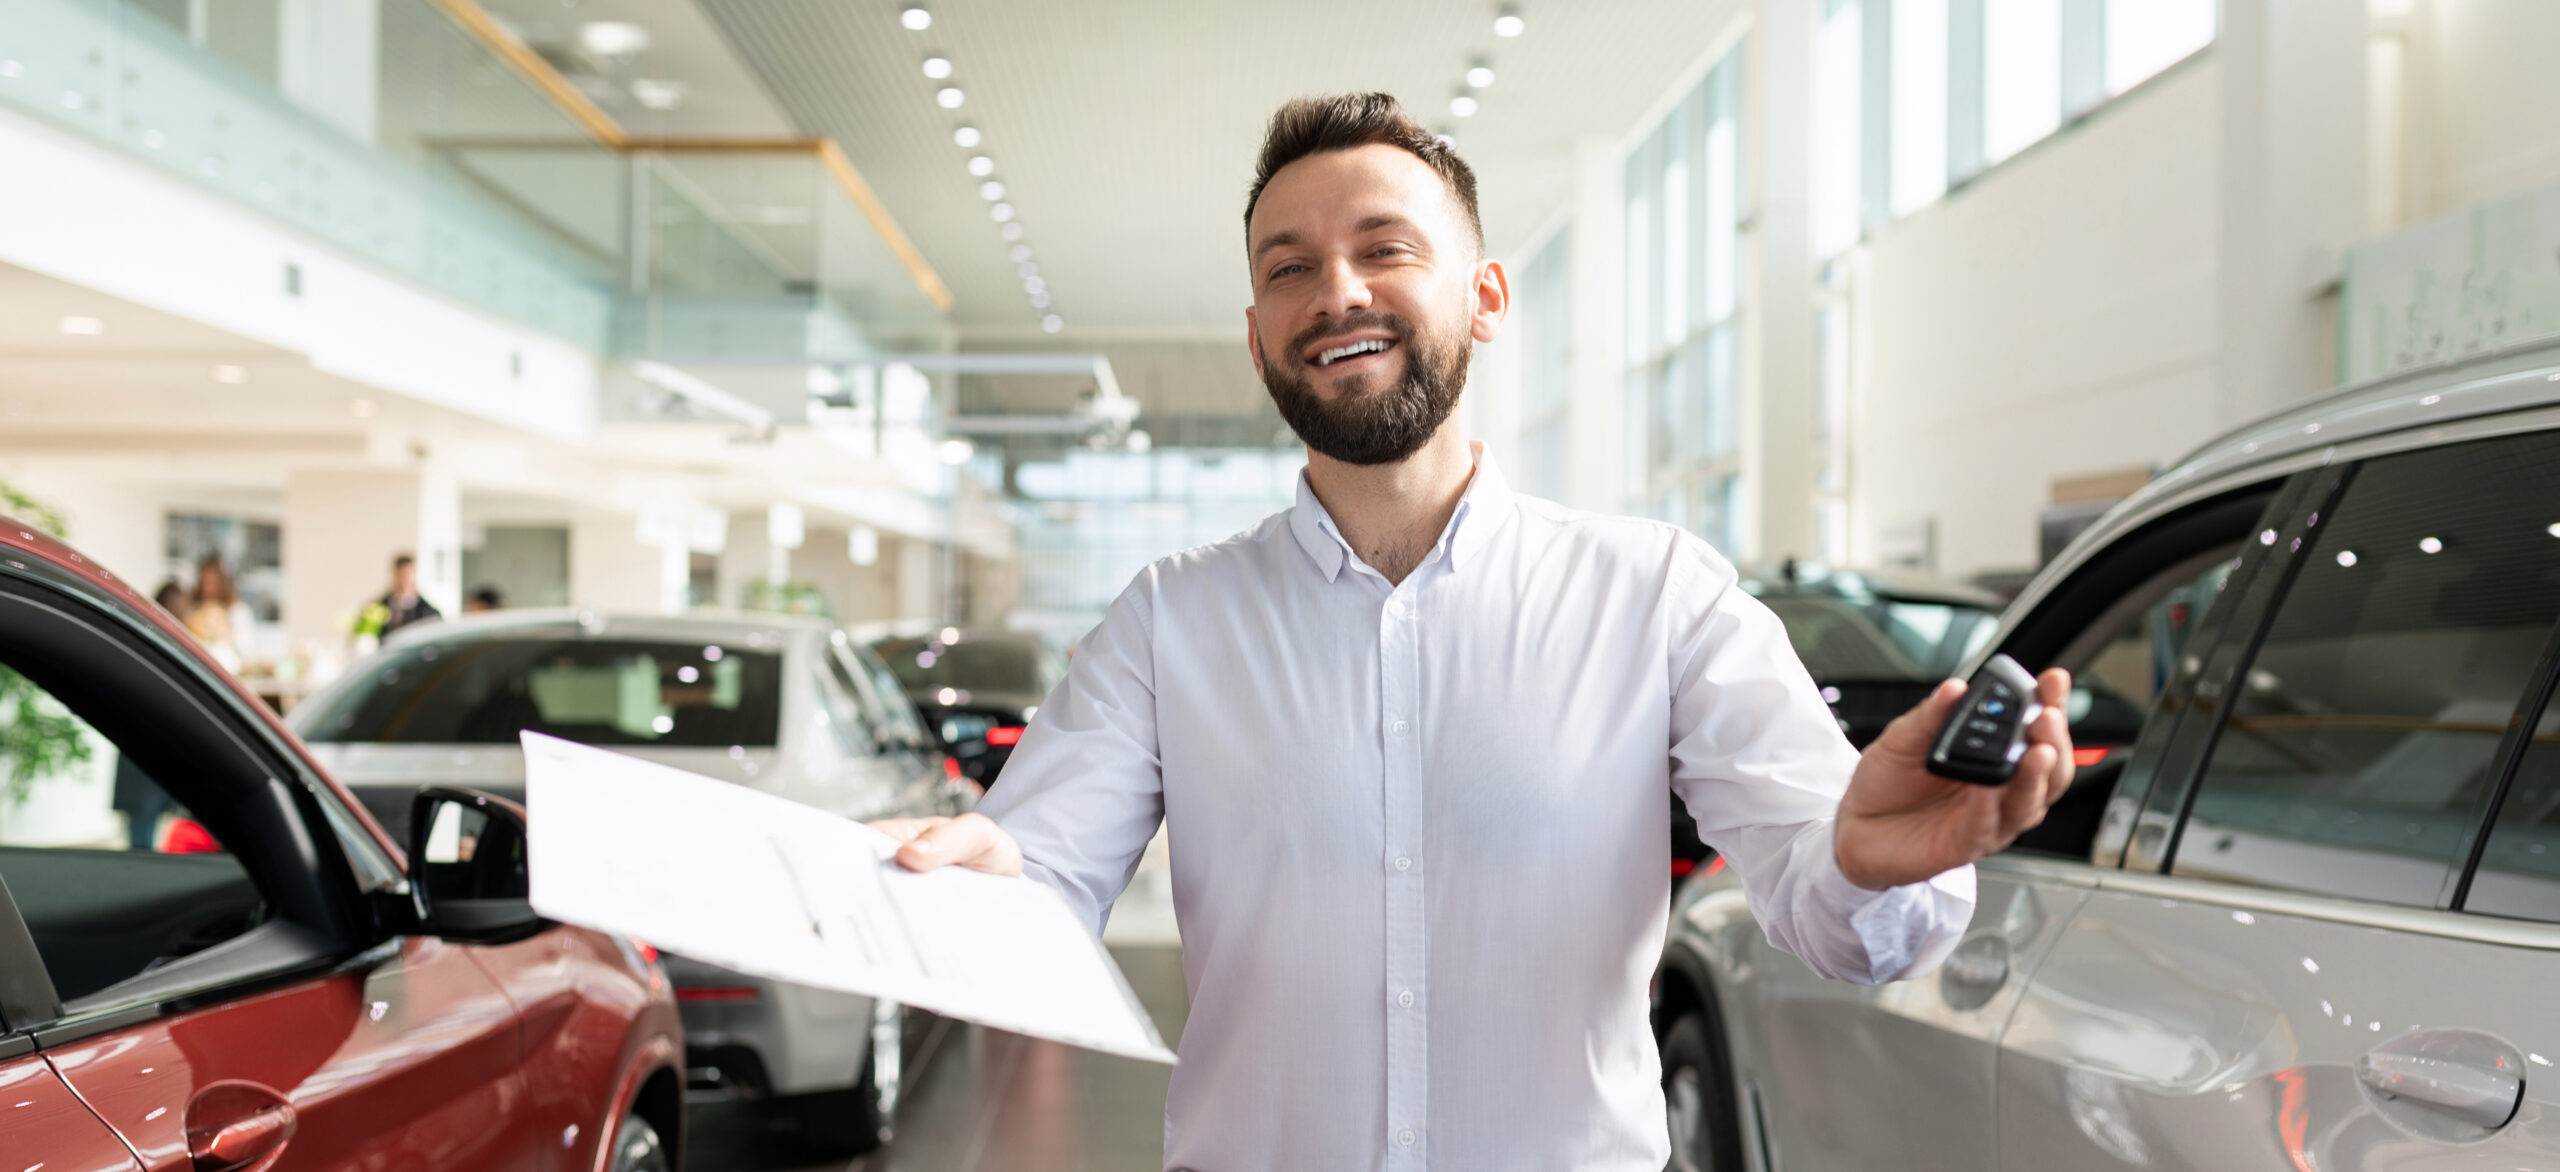 5 Reasons Why Buying a Local Used Car is Better for You and the Community